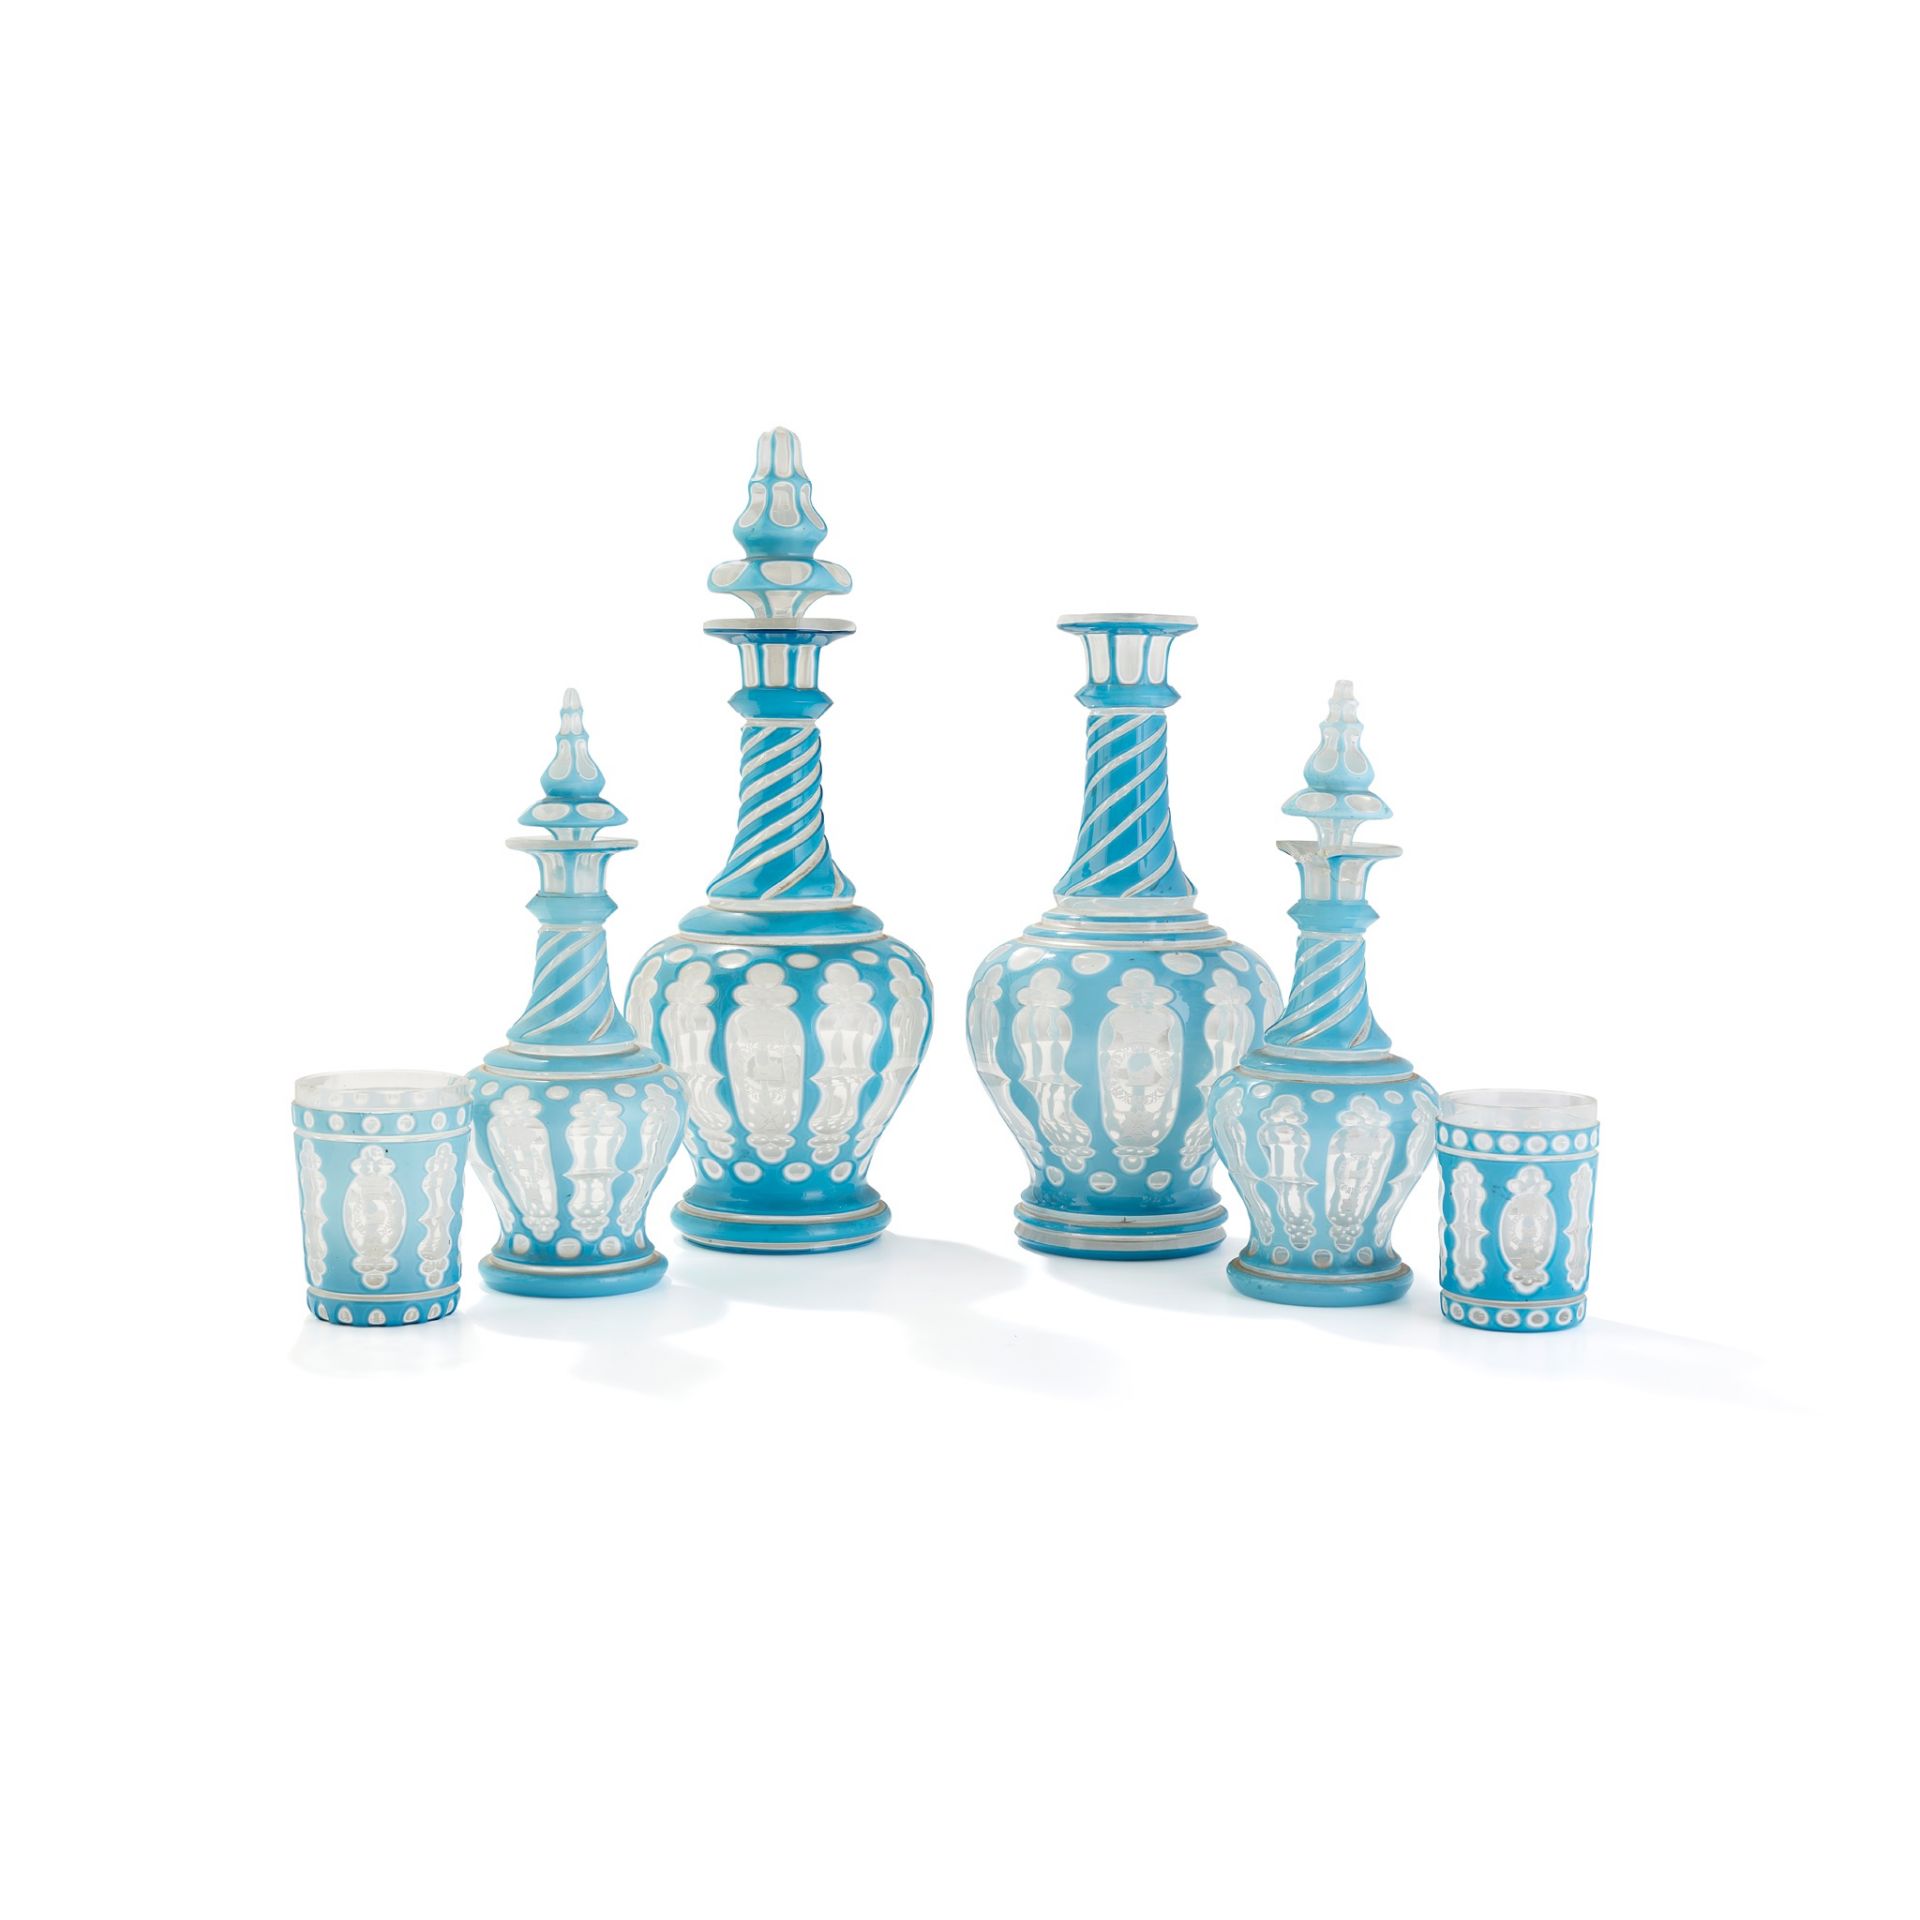 GROUP OF FOUR BOHEMIAN OVERLAY GLASS DECANTERS ENGRAVED WITH THE BREADALBANE CREST AND THE ORDER OF - Image 4 of 4